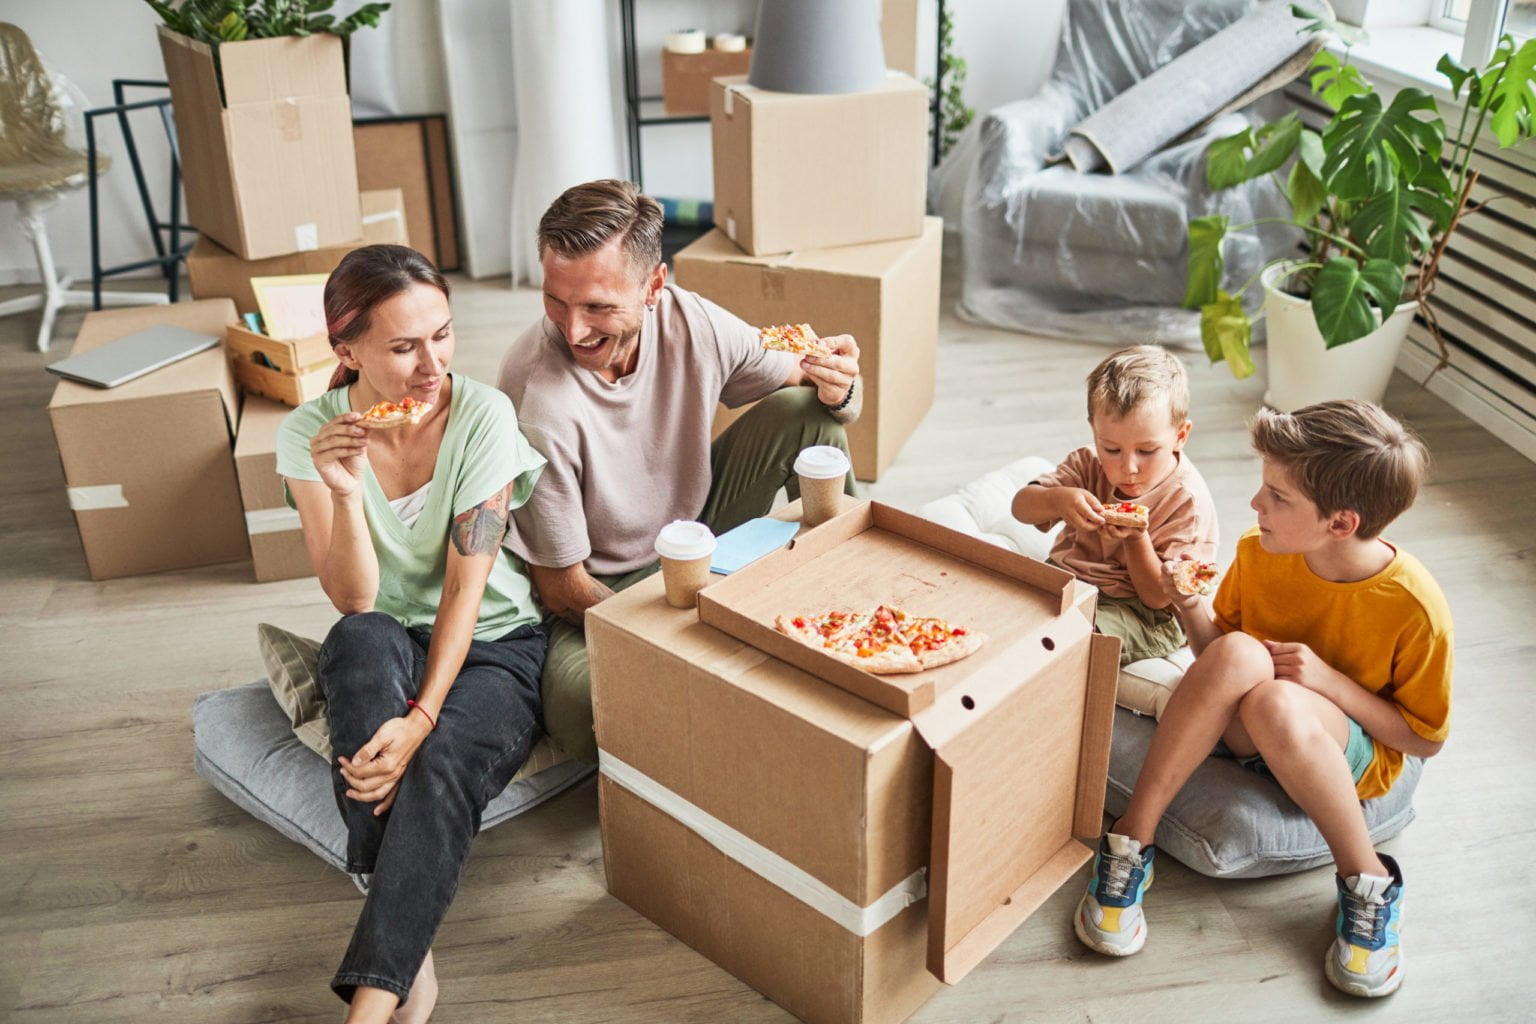 Family Eating Pizza in New Home